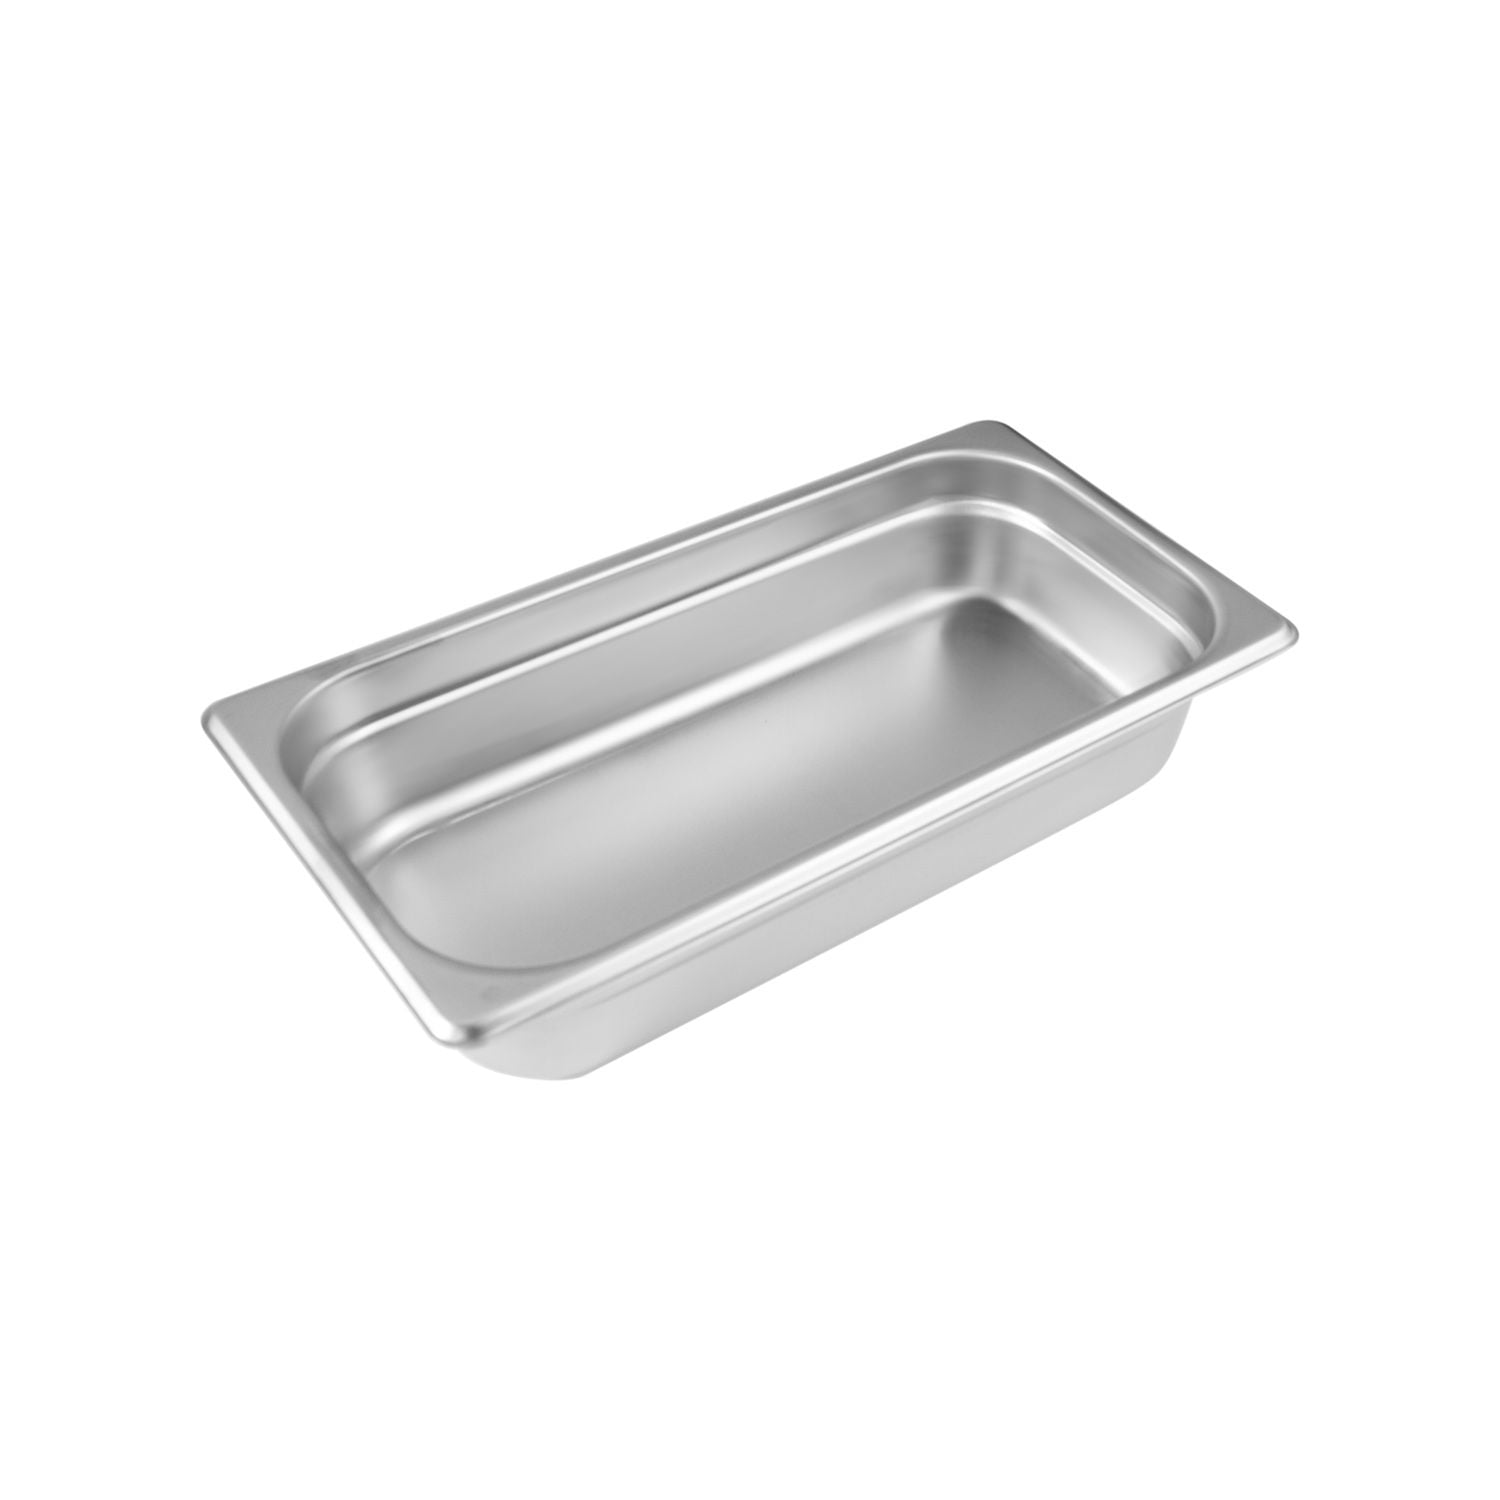 Extra Heavy Gauge Premium Stainless Steel Gastronorm Pans 1/4 